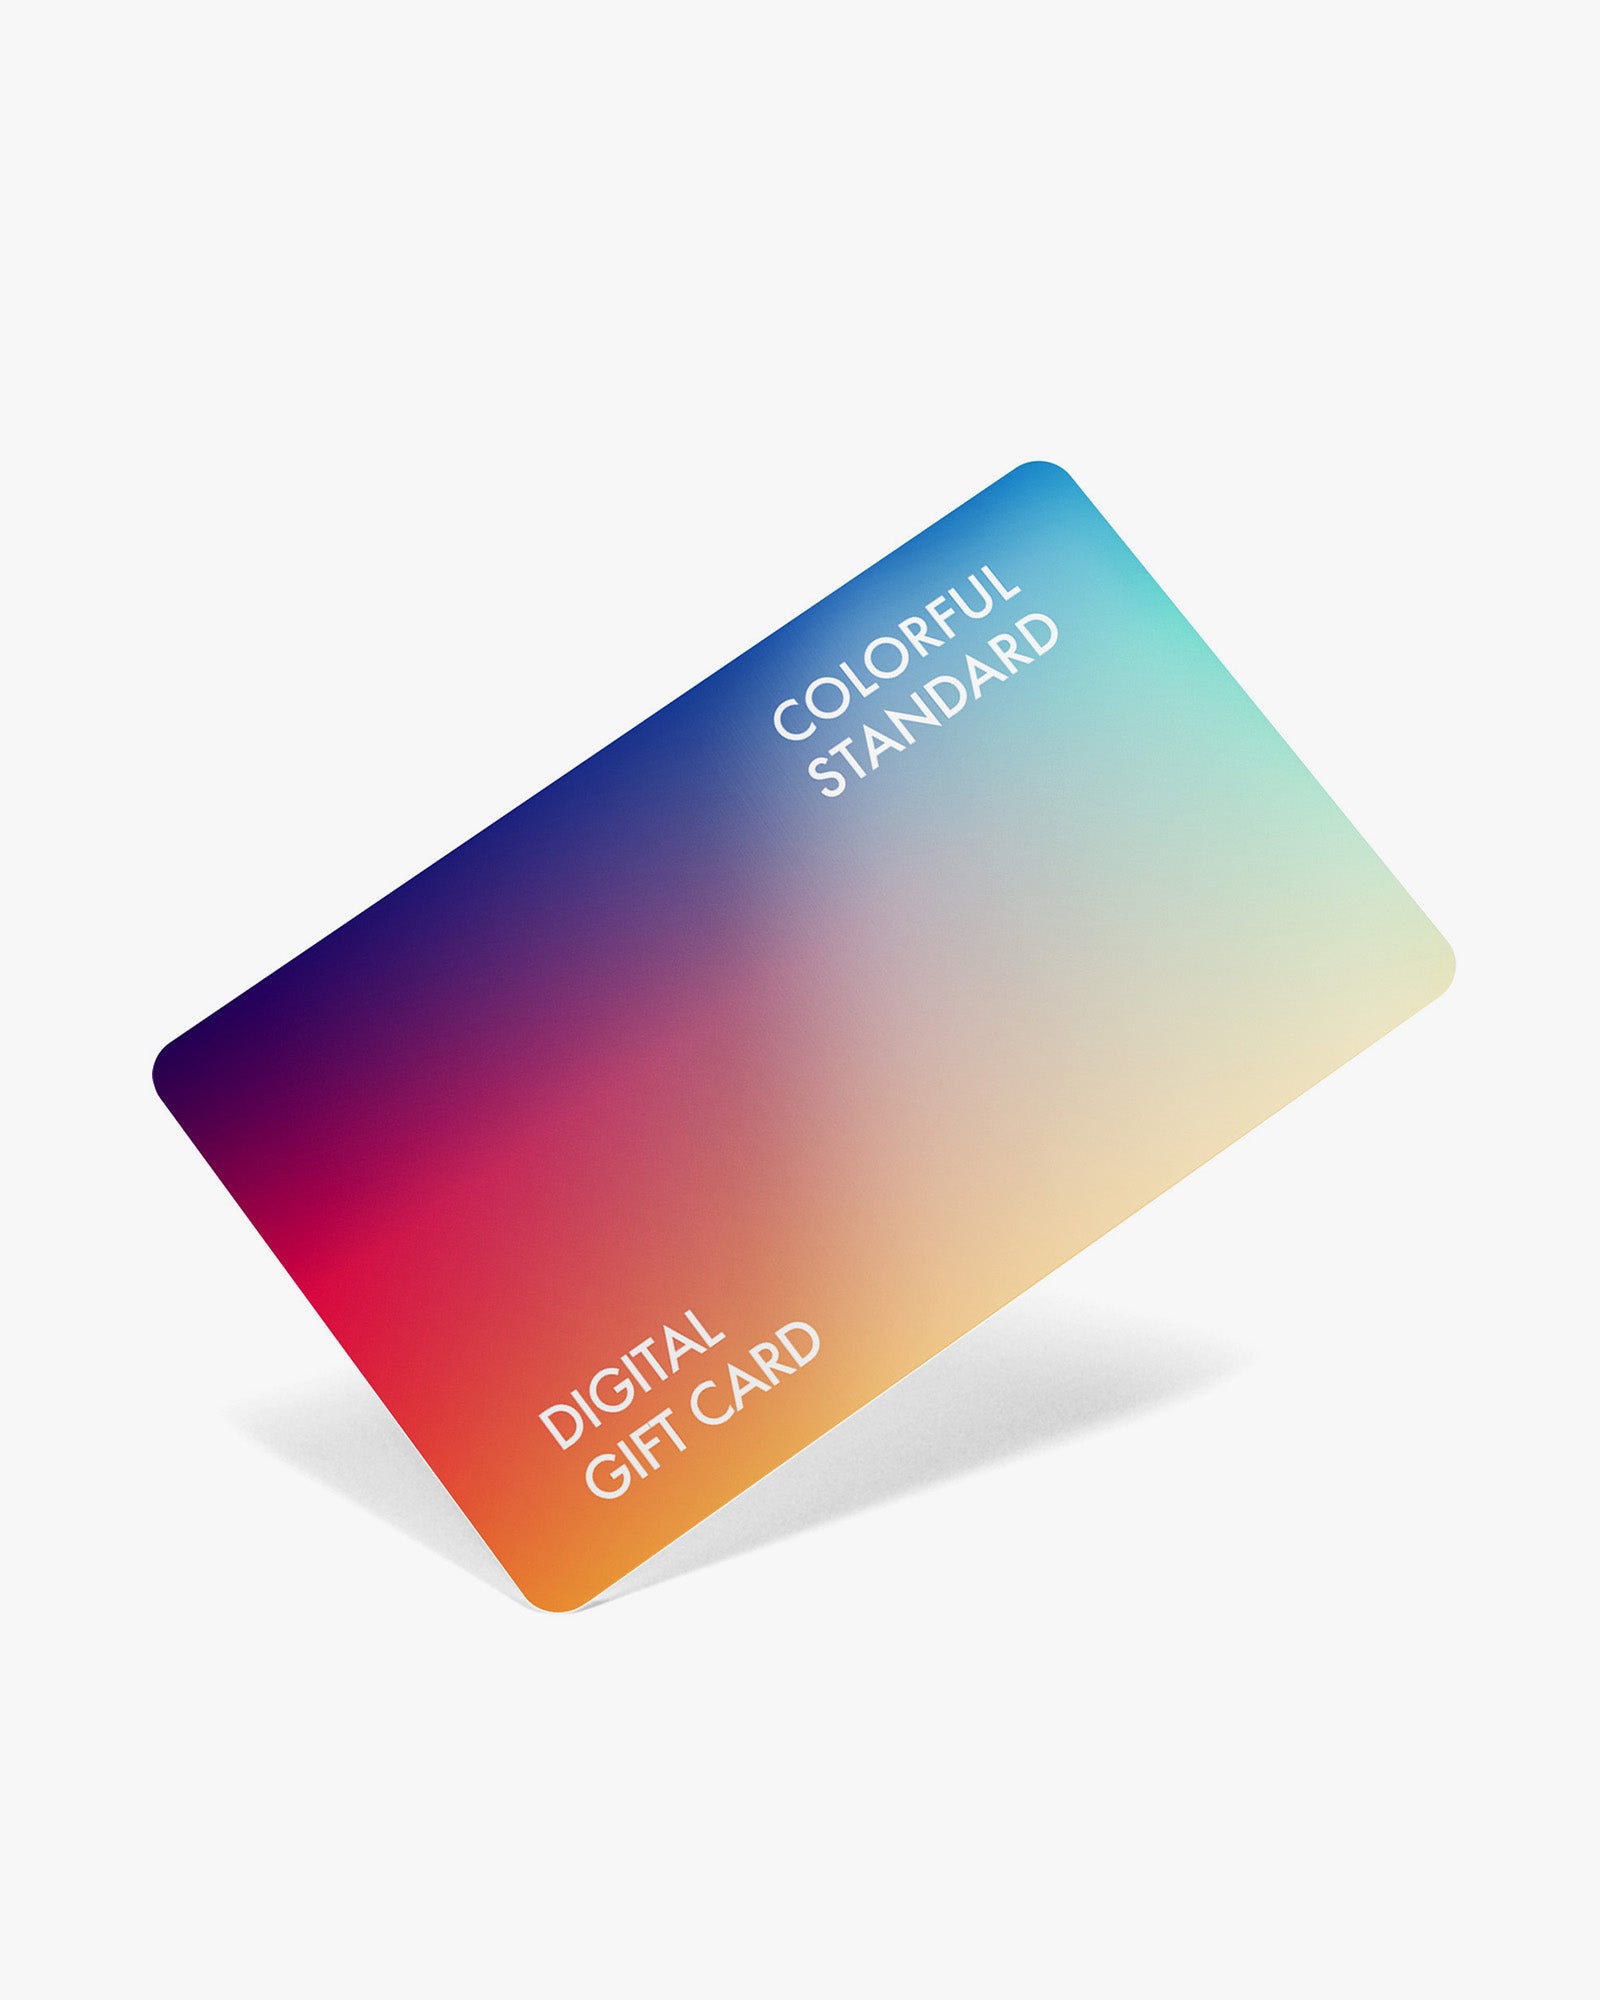 TRANSFER004 - Company - transfer to digital gift cards : General Help Center